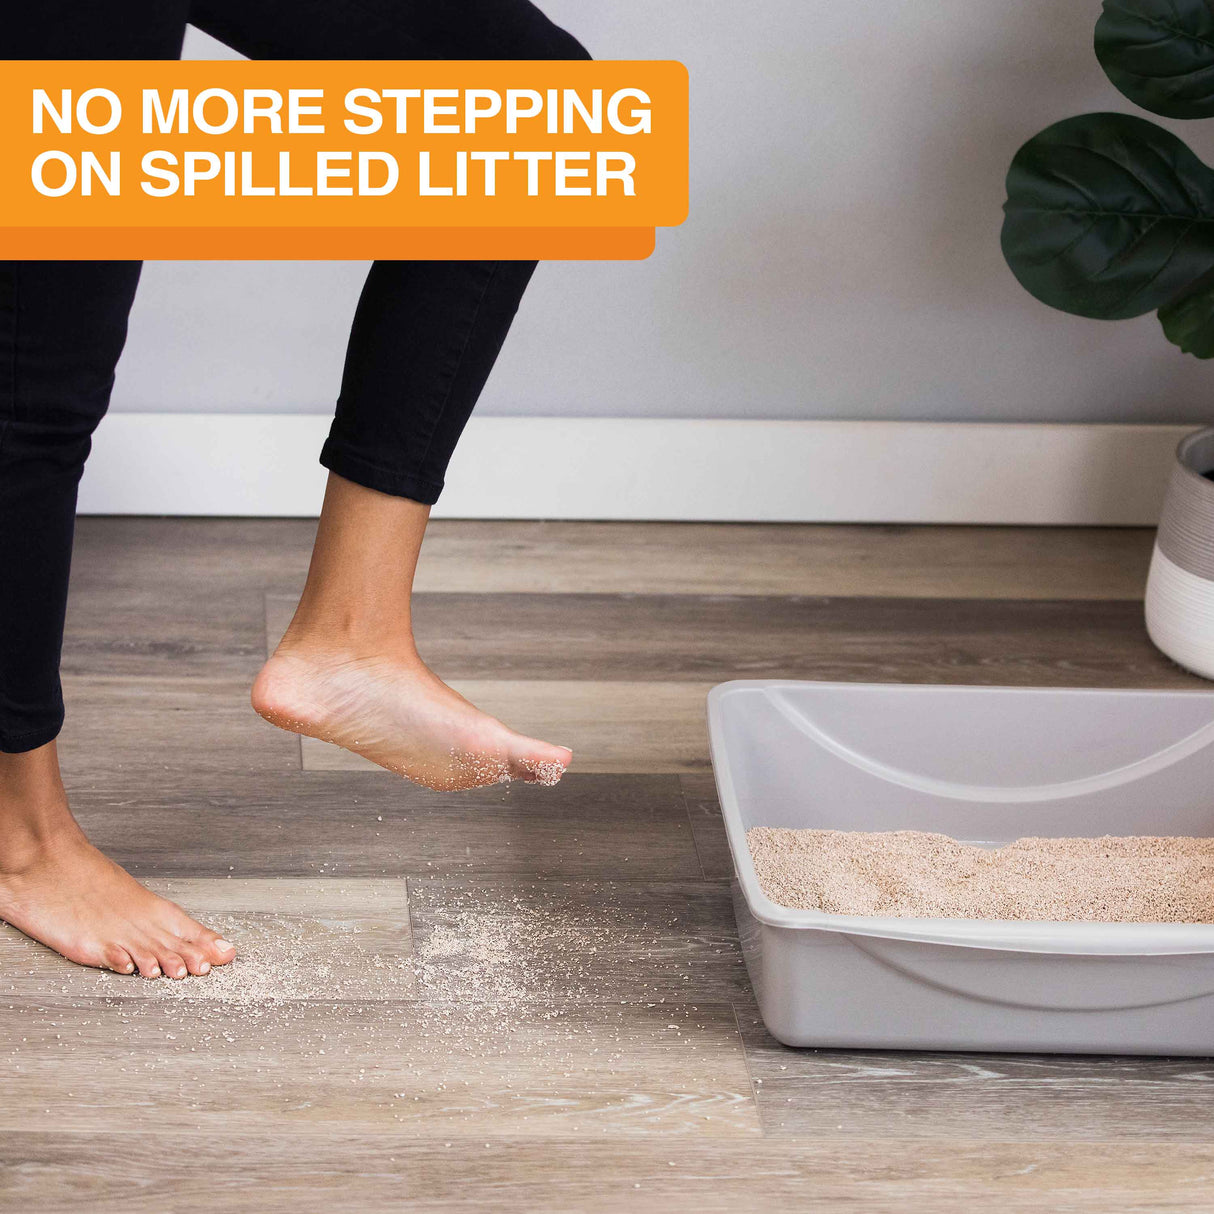 No more stepping on spilled litter